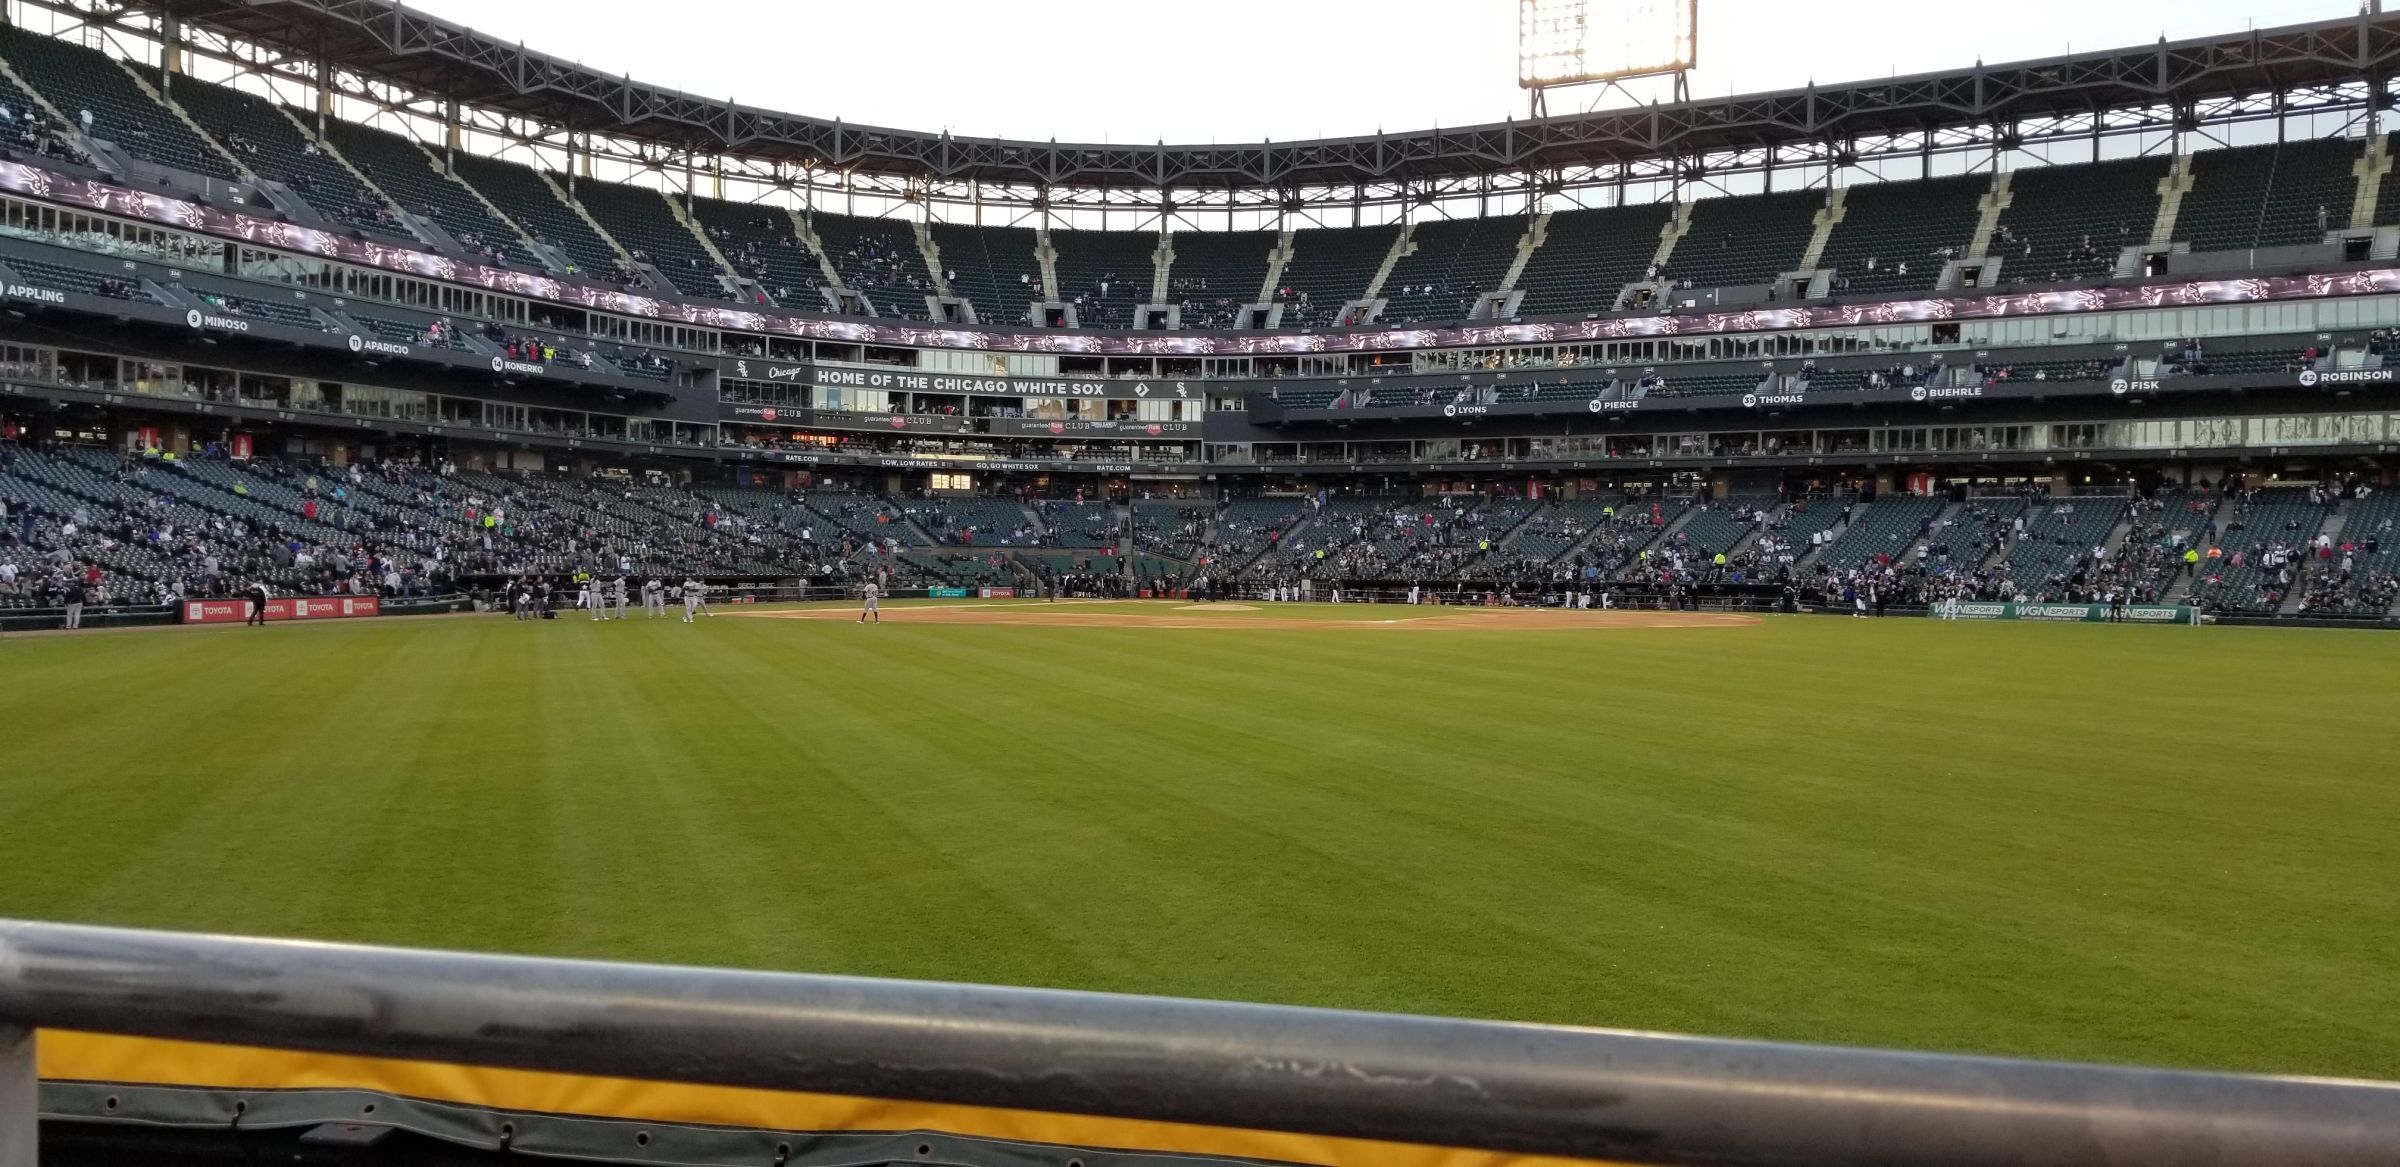 Section 103 at Guaranteed Rate Field 